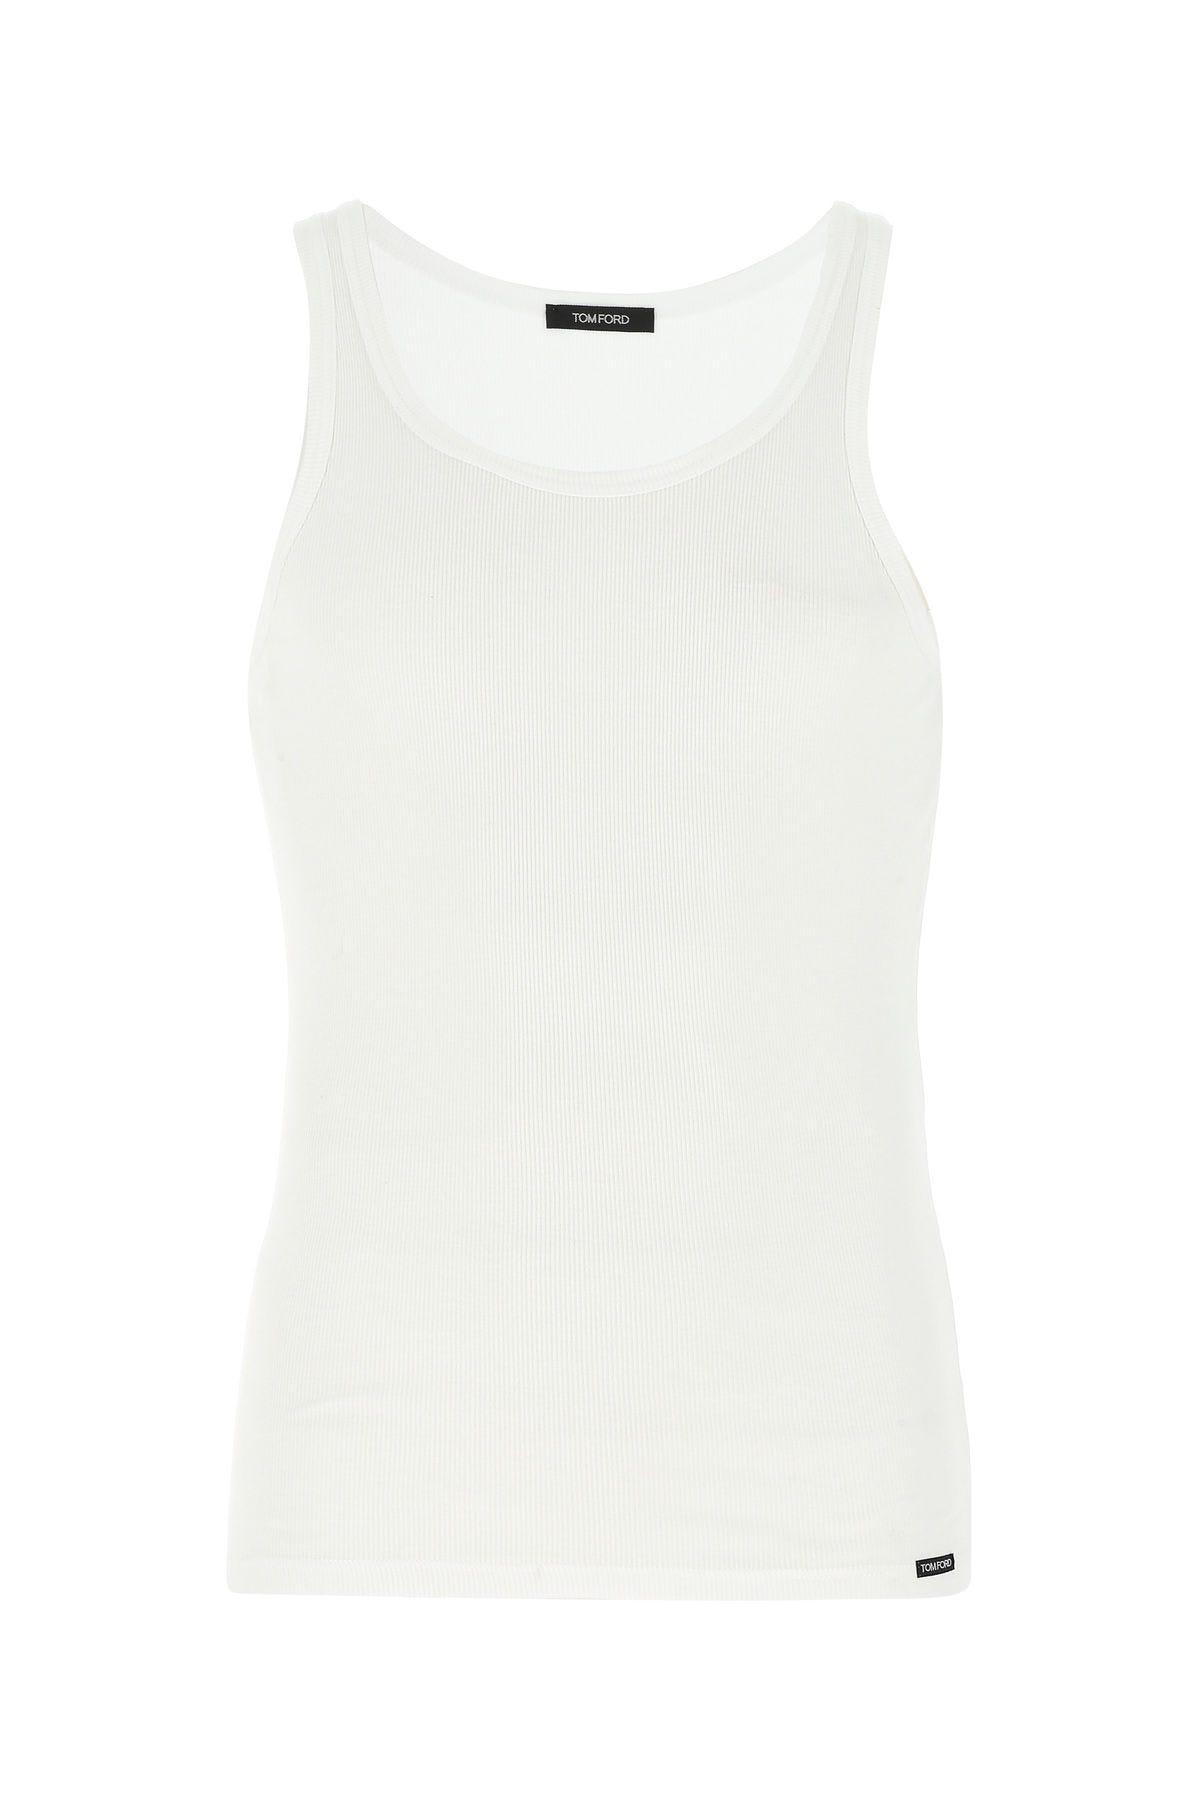 Shop Tom Ford White Cotton And Modal Tank Top